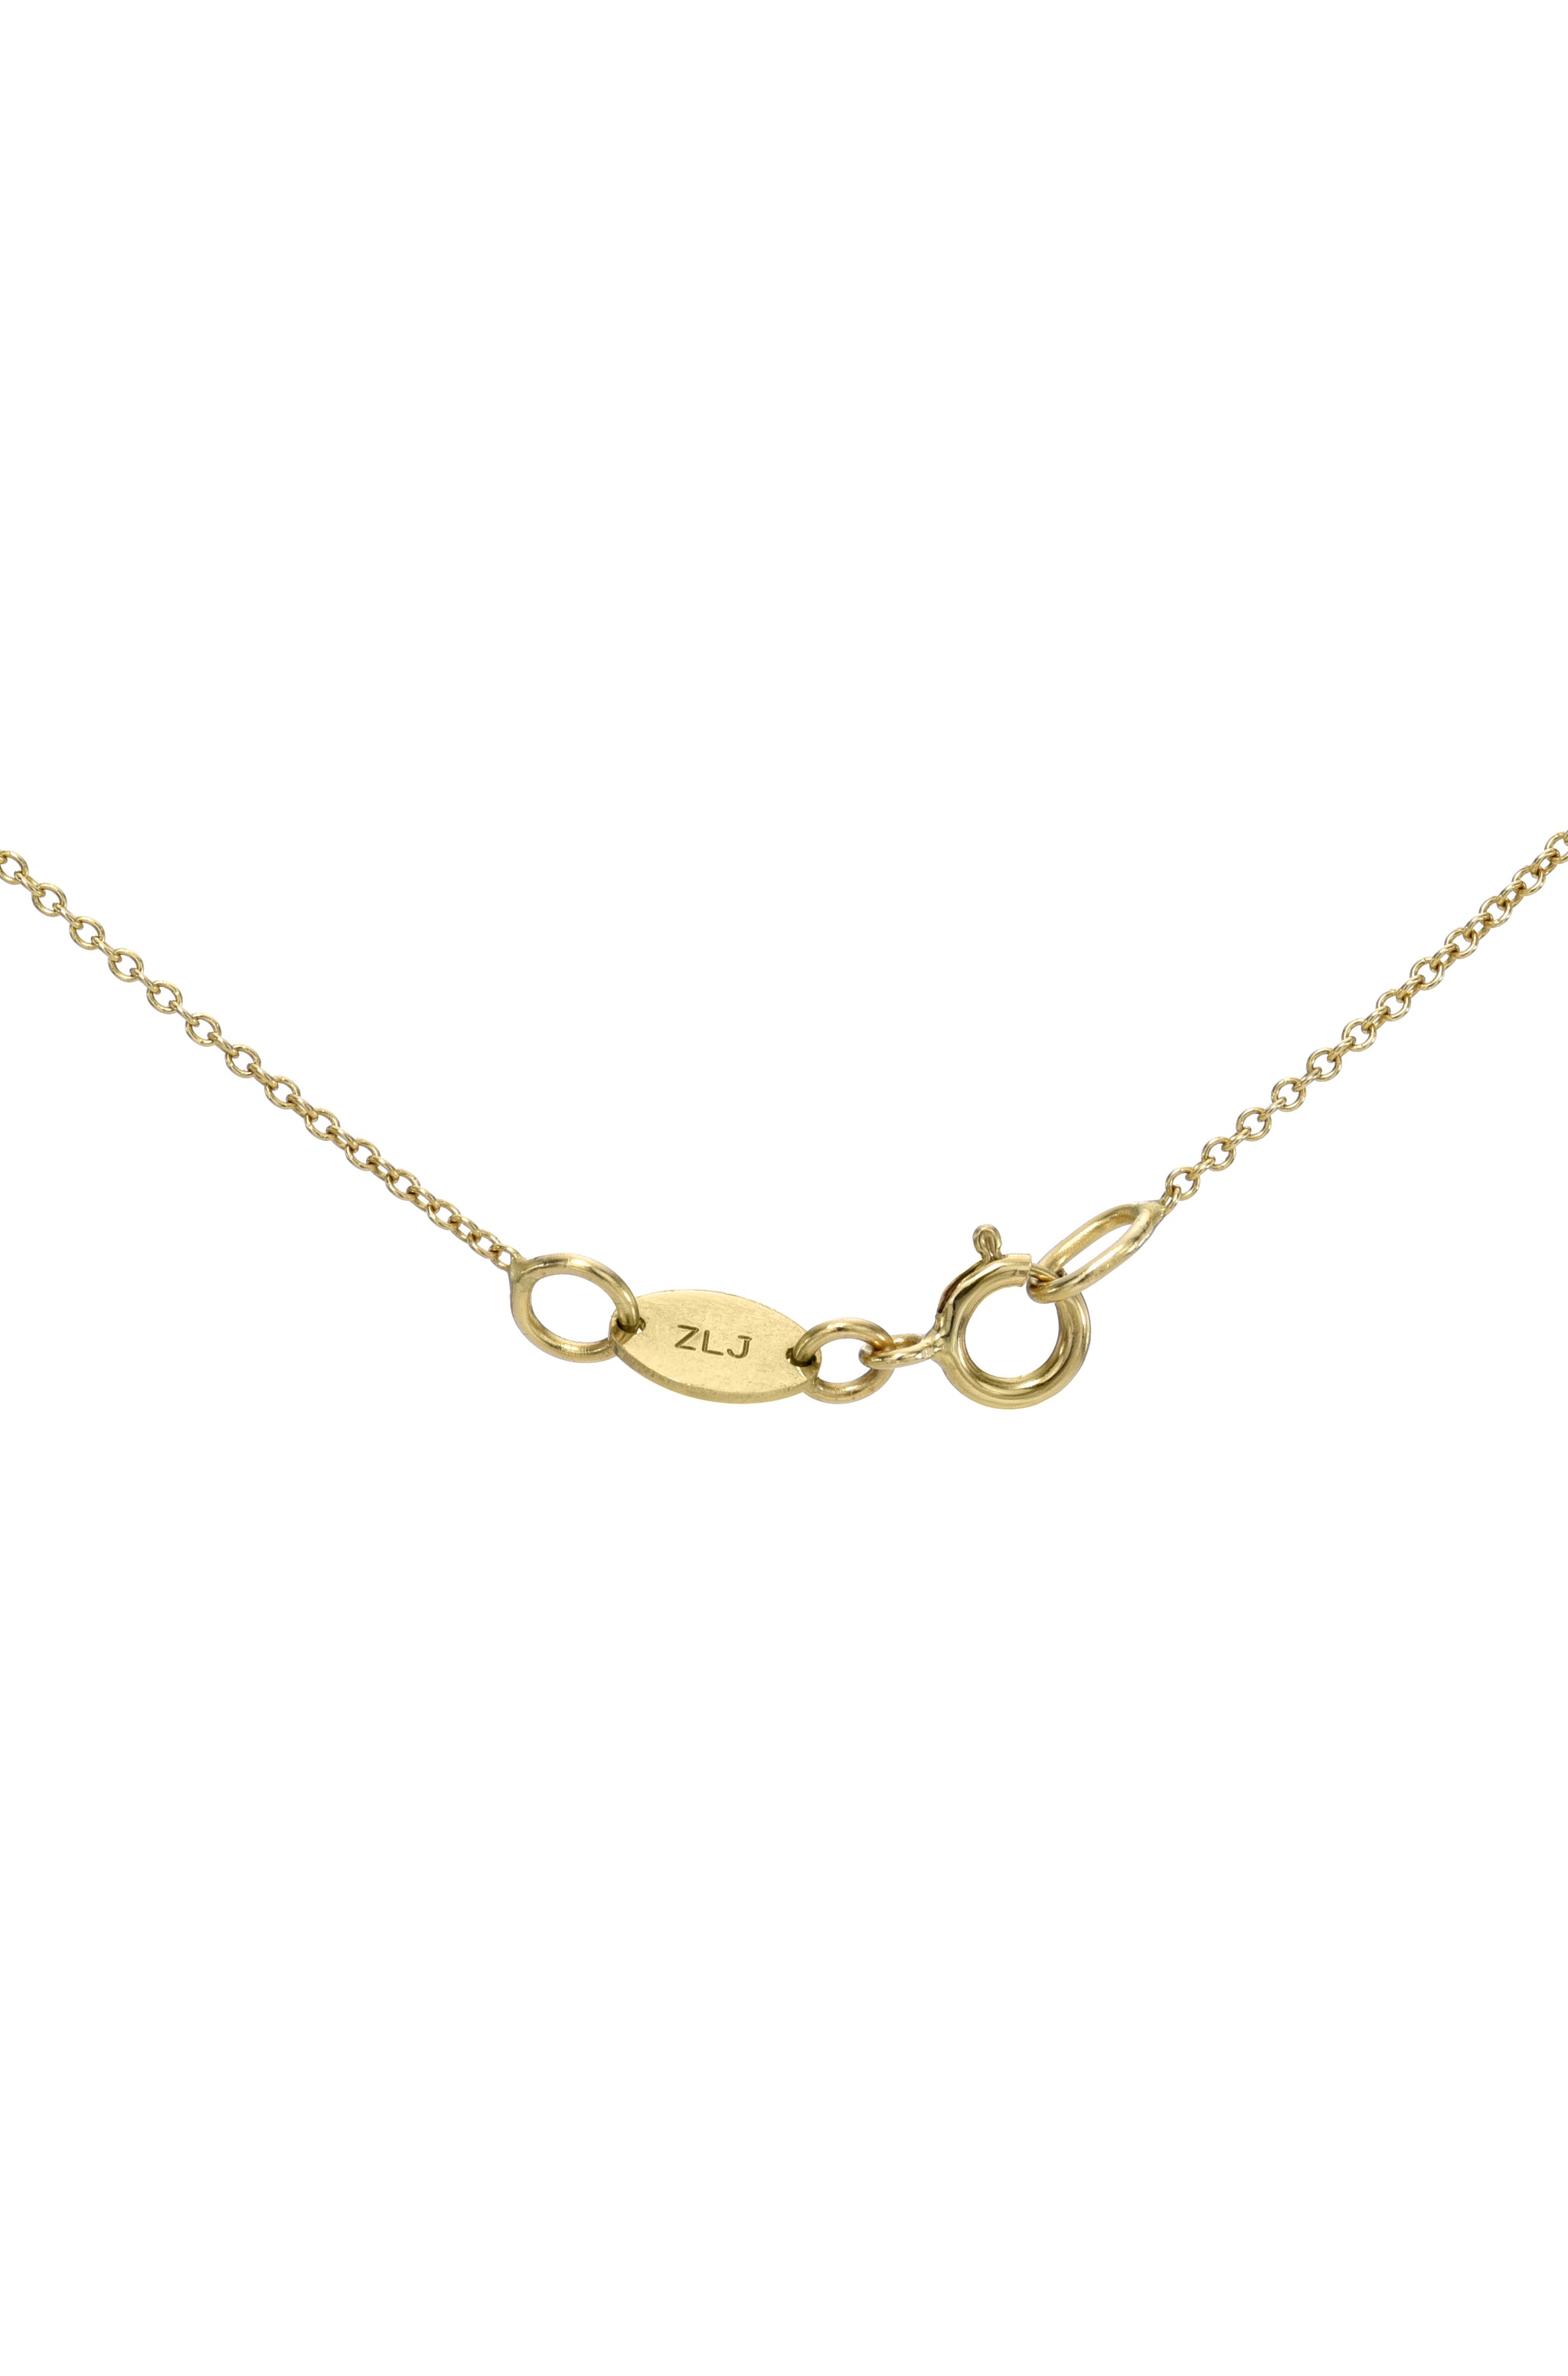 14ct Gold Mini Short Cable Chain Charm Necklace